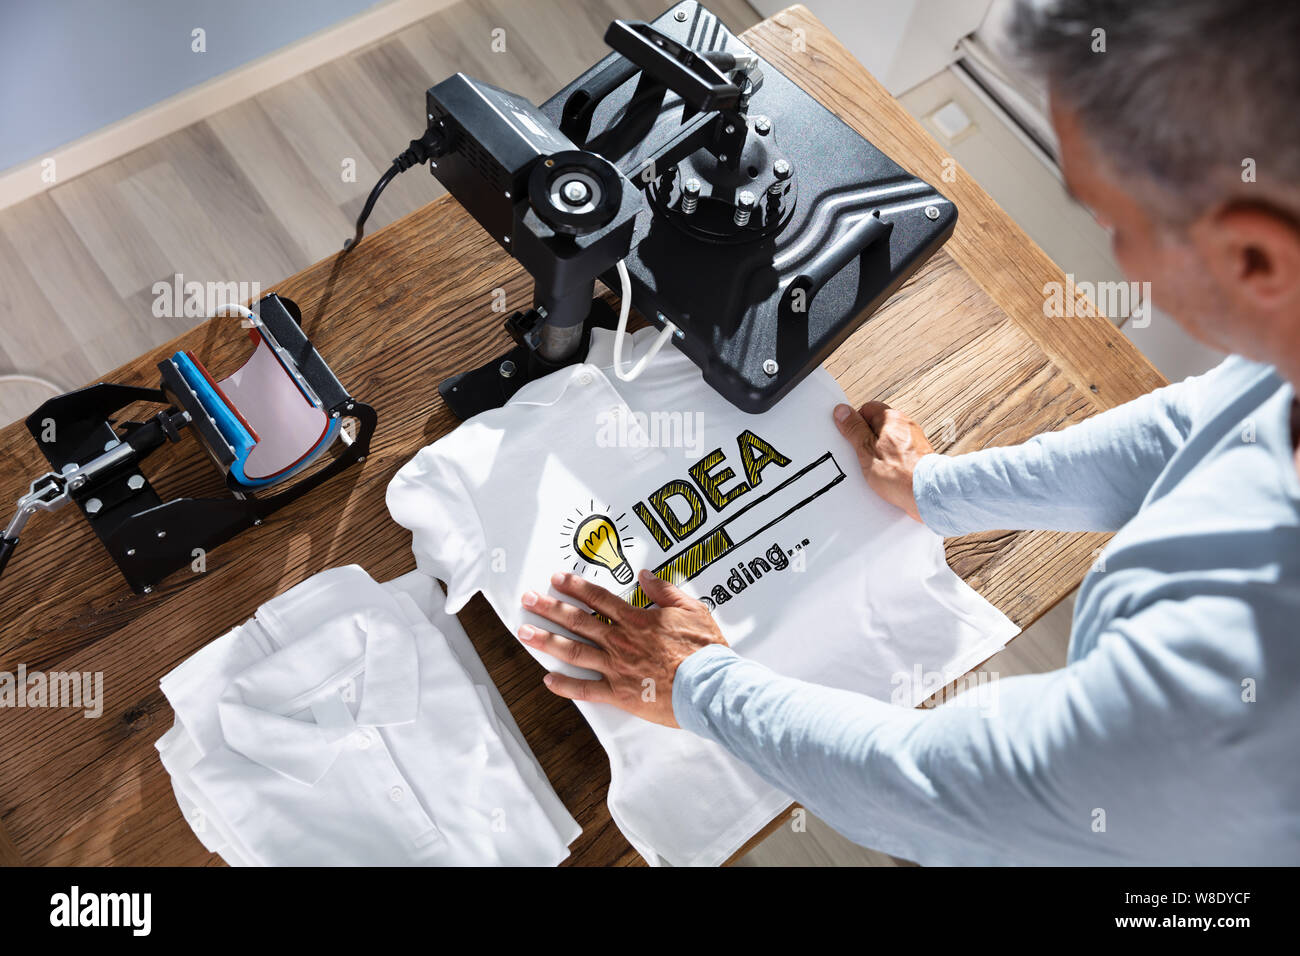 Man Printing Image On T-Shirt In Workshop Stock Photo